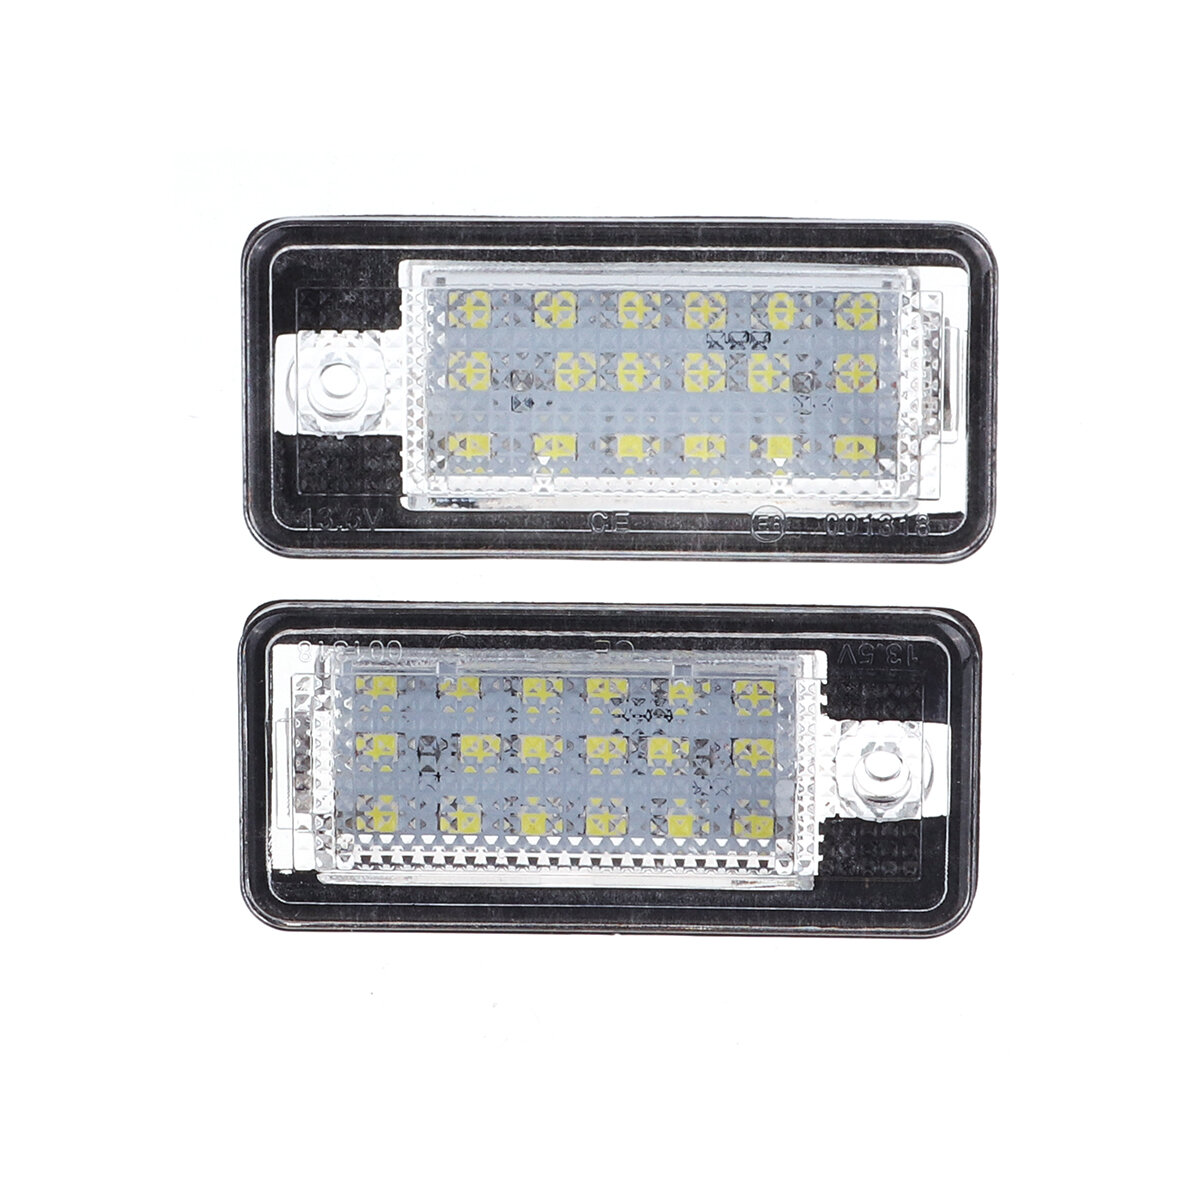 Paar 12 V LED Licentie Kentekenverlichting Lamp Voor Audi A4 A6 S3 Q7 RS4 RS6